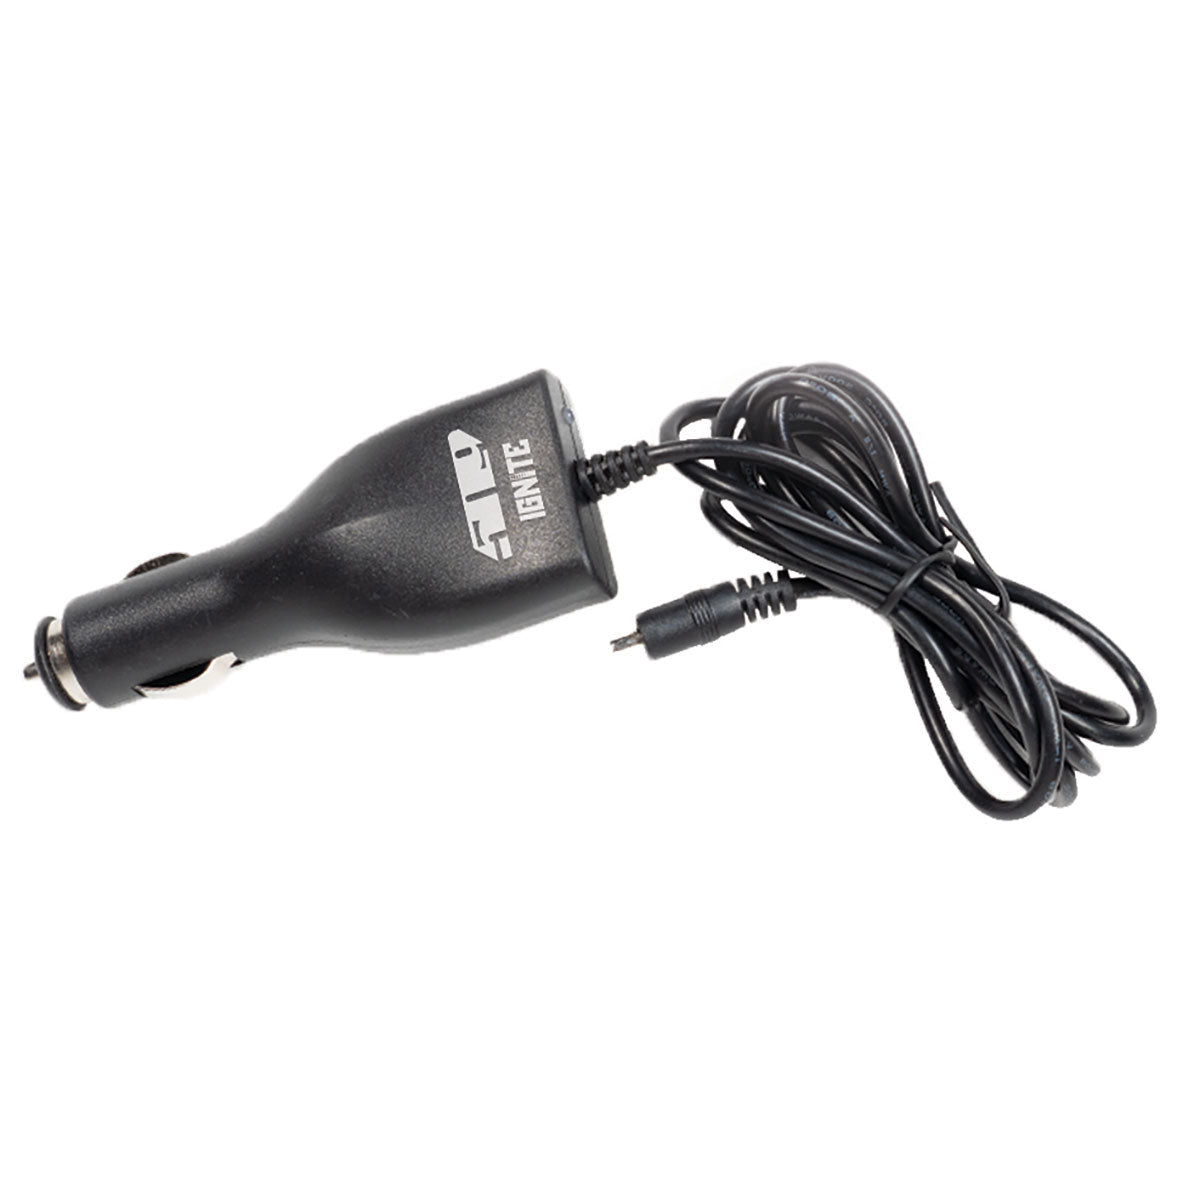 509 12 Volt Charger for Ignite Batteries F02005200-000-000